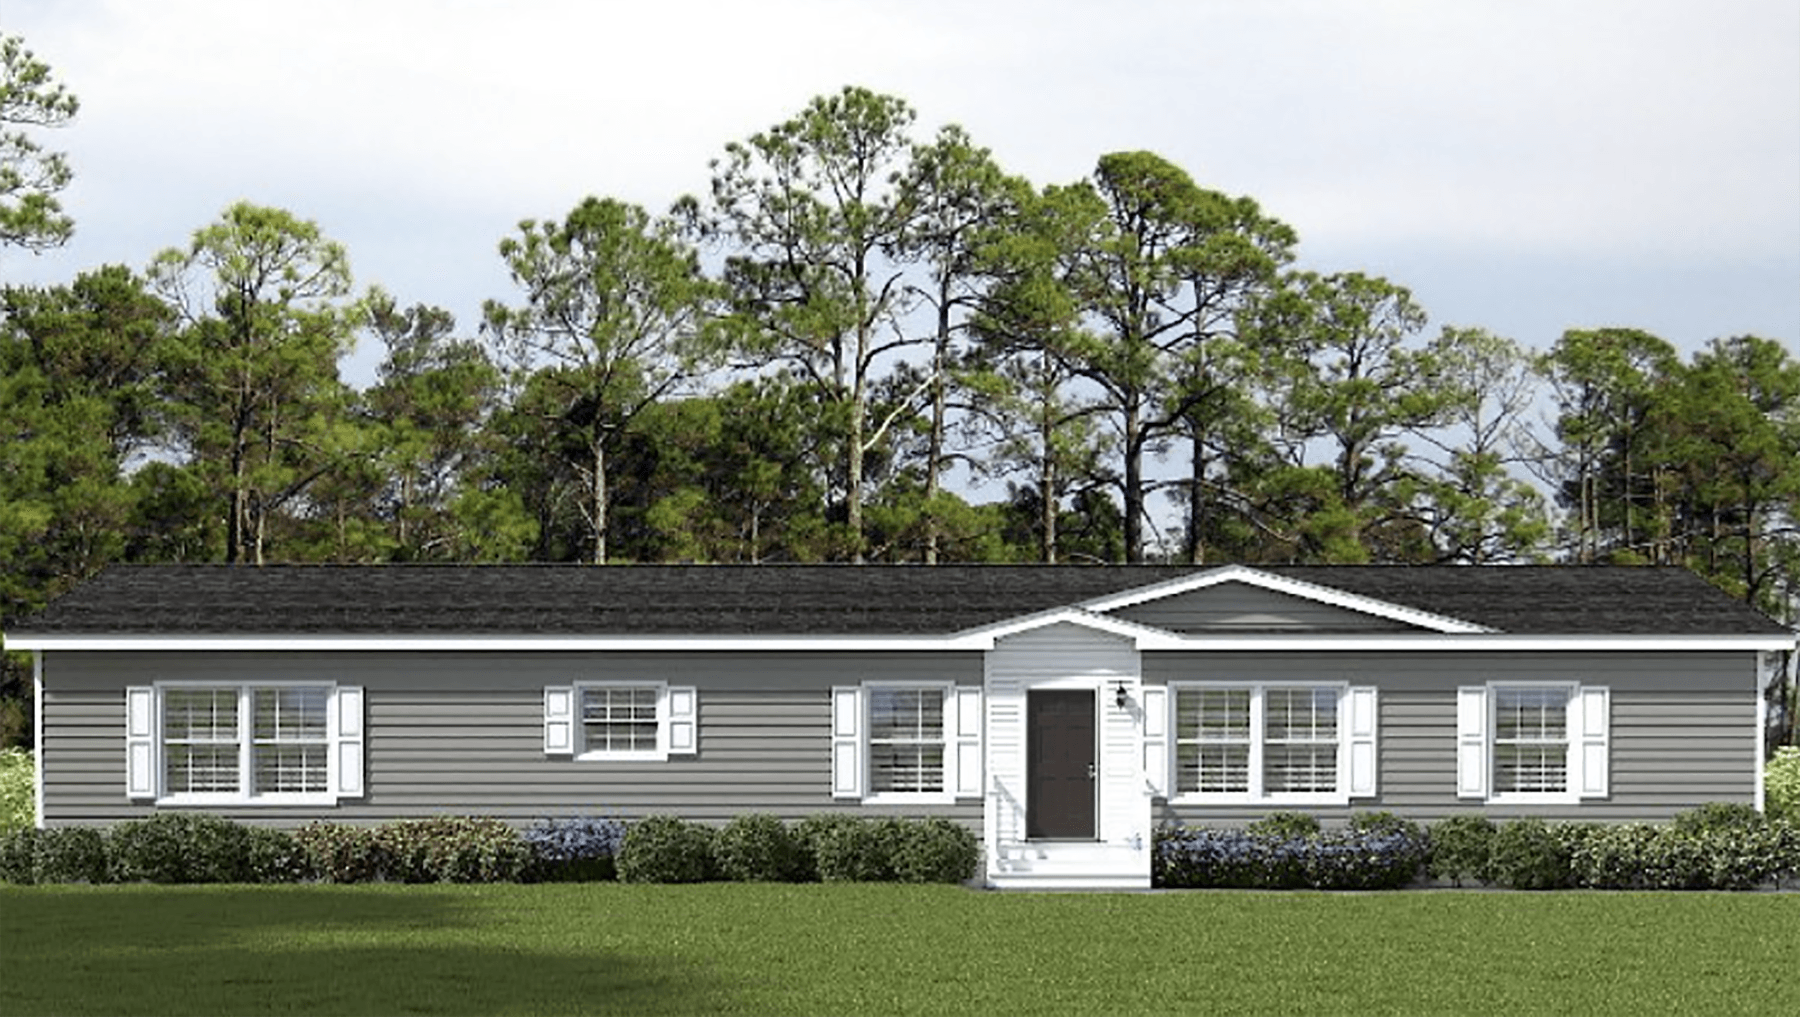 Modular Homes vs. Stick Built Homes: Which is the Better Option for You?